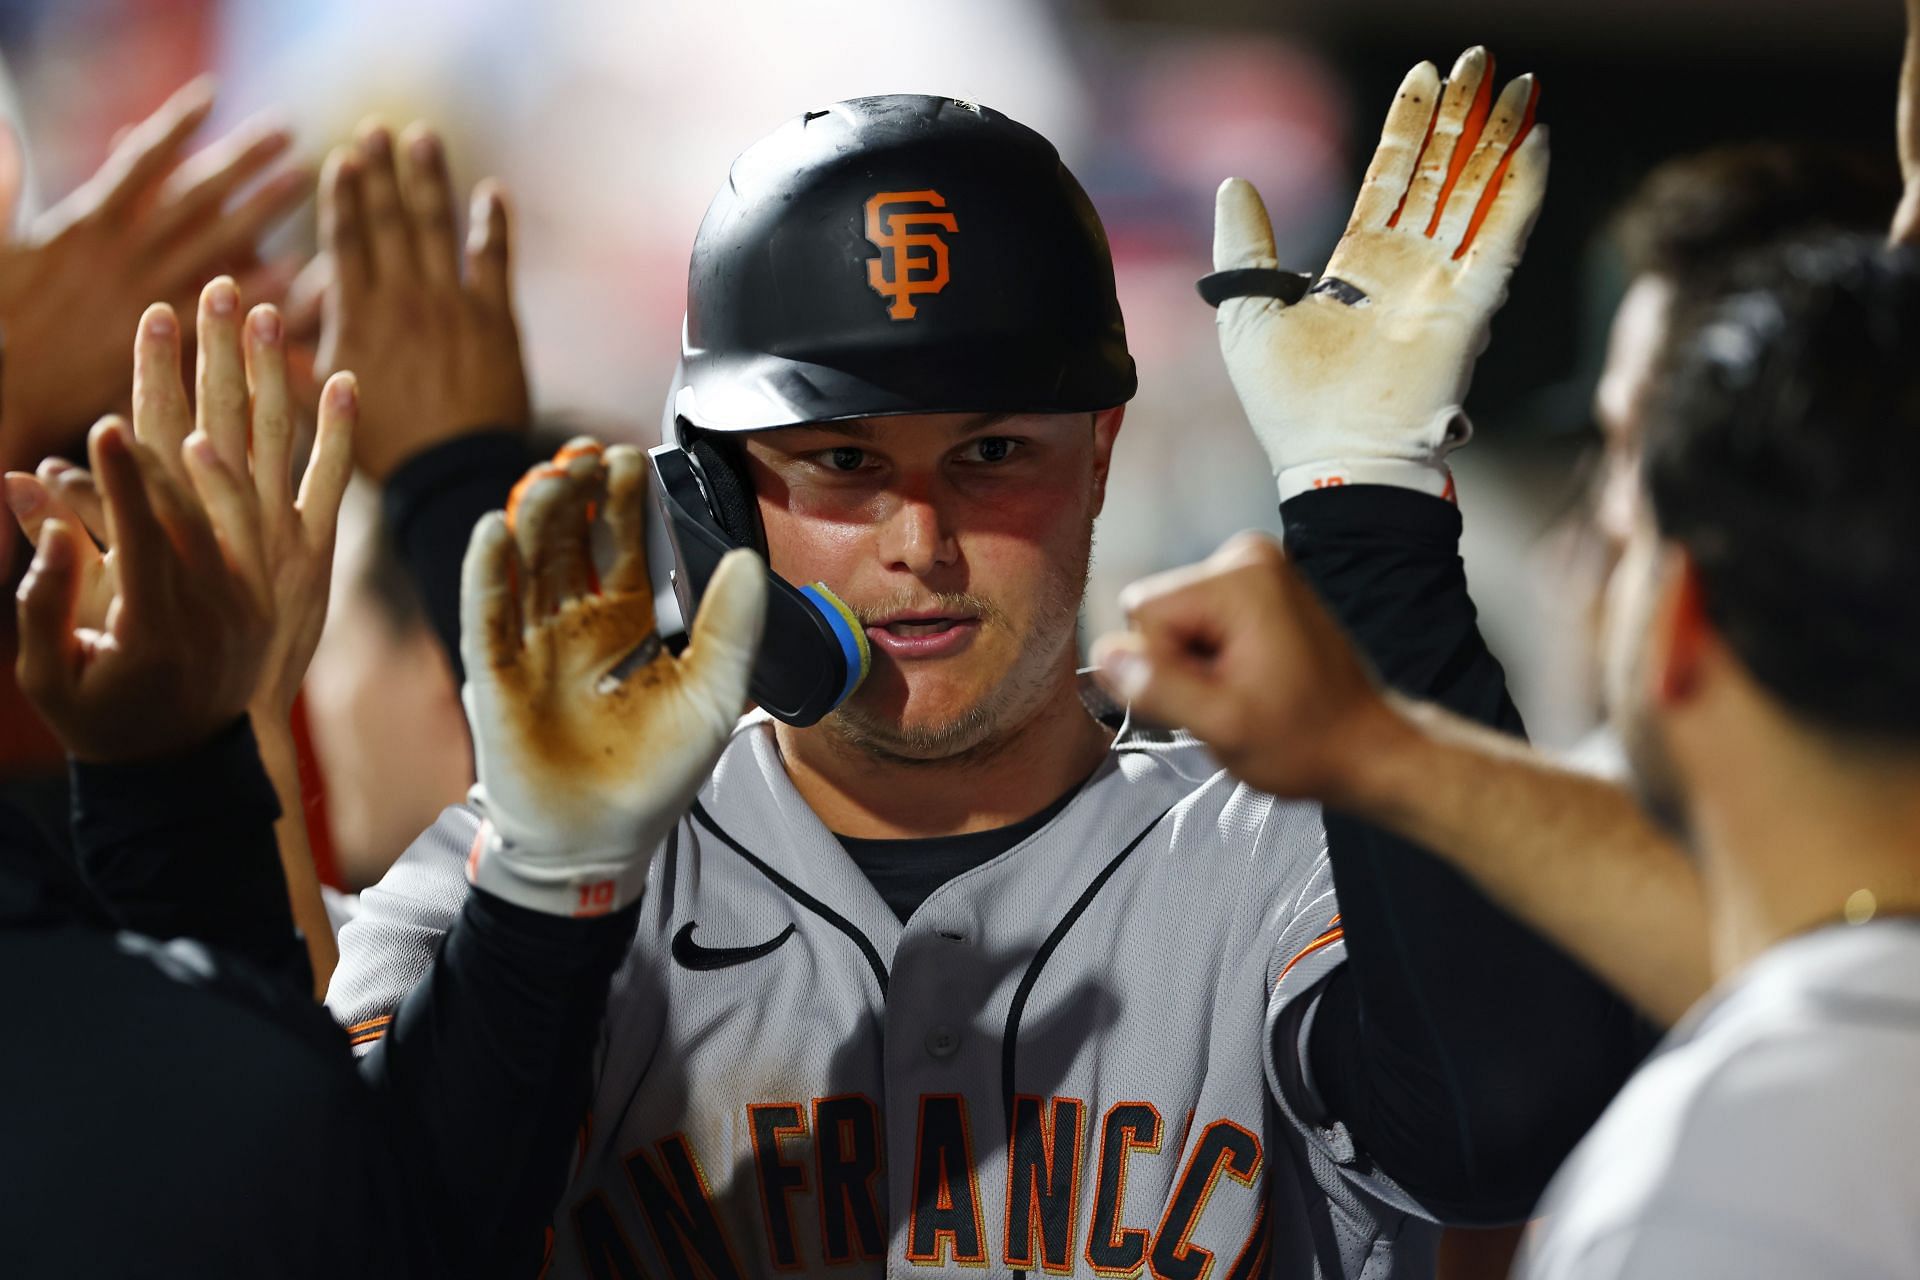 Joc Pederson accepts qualifying offer, will return to Giants – KNBR